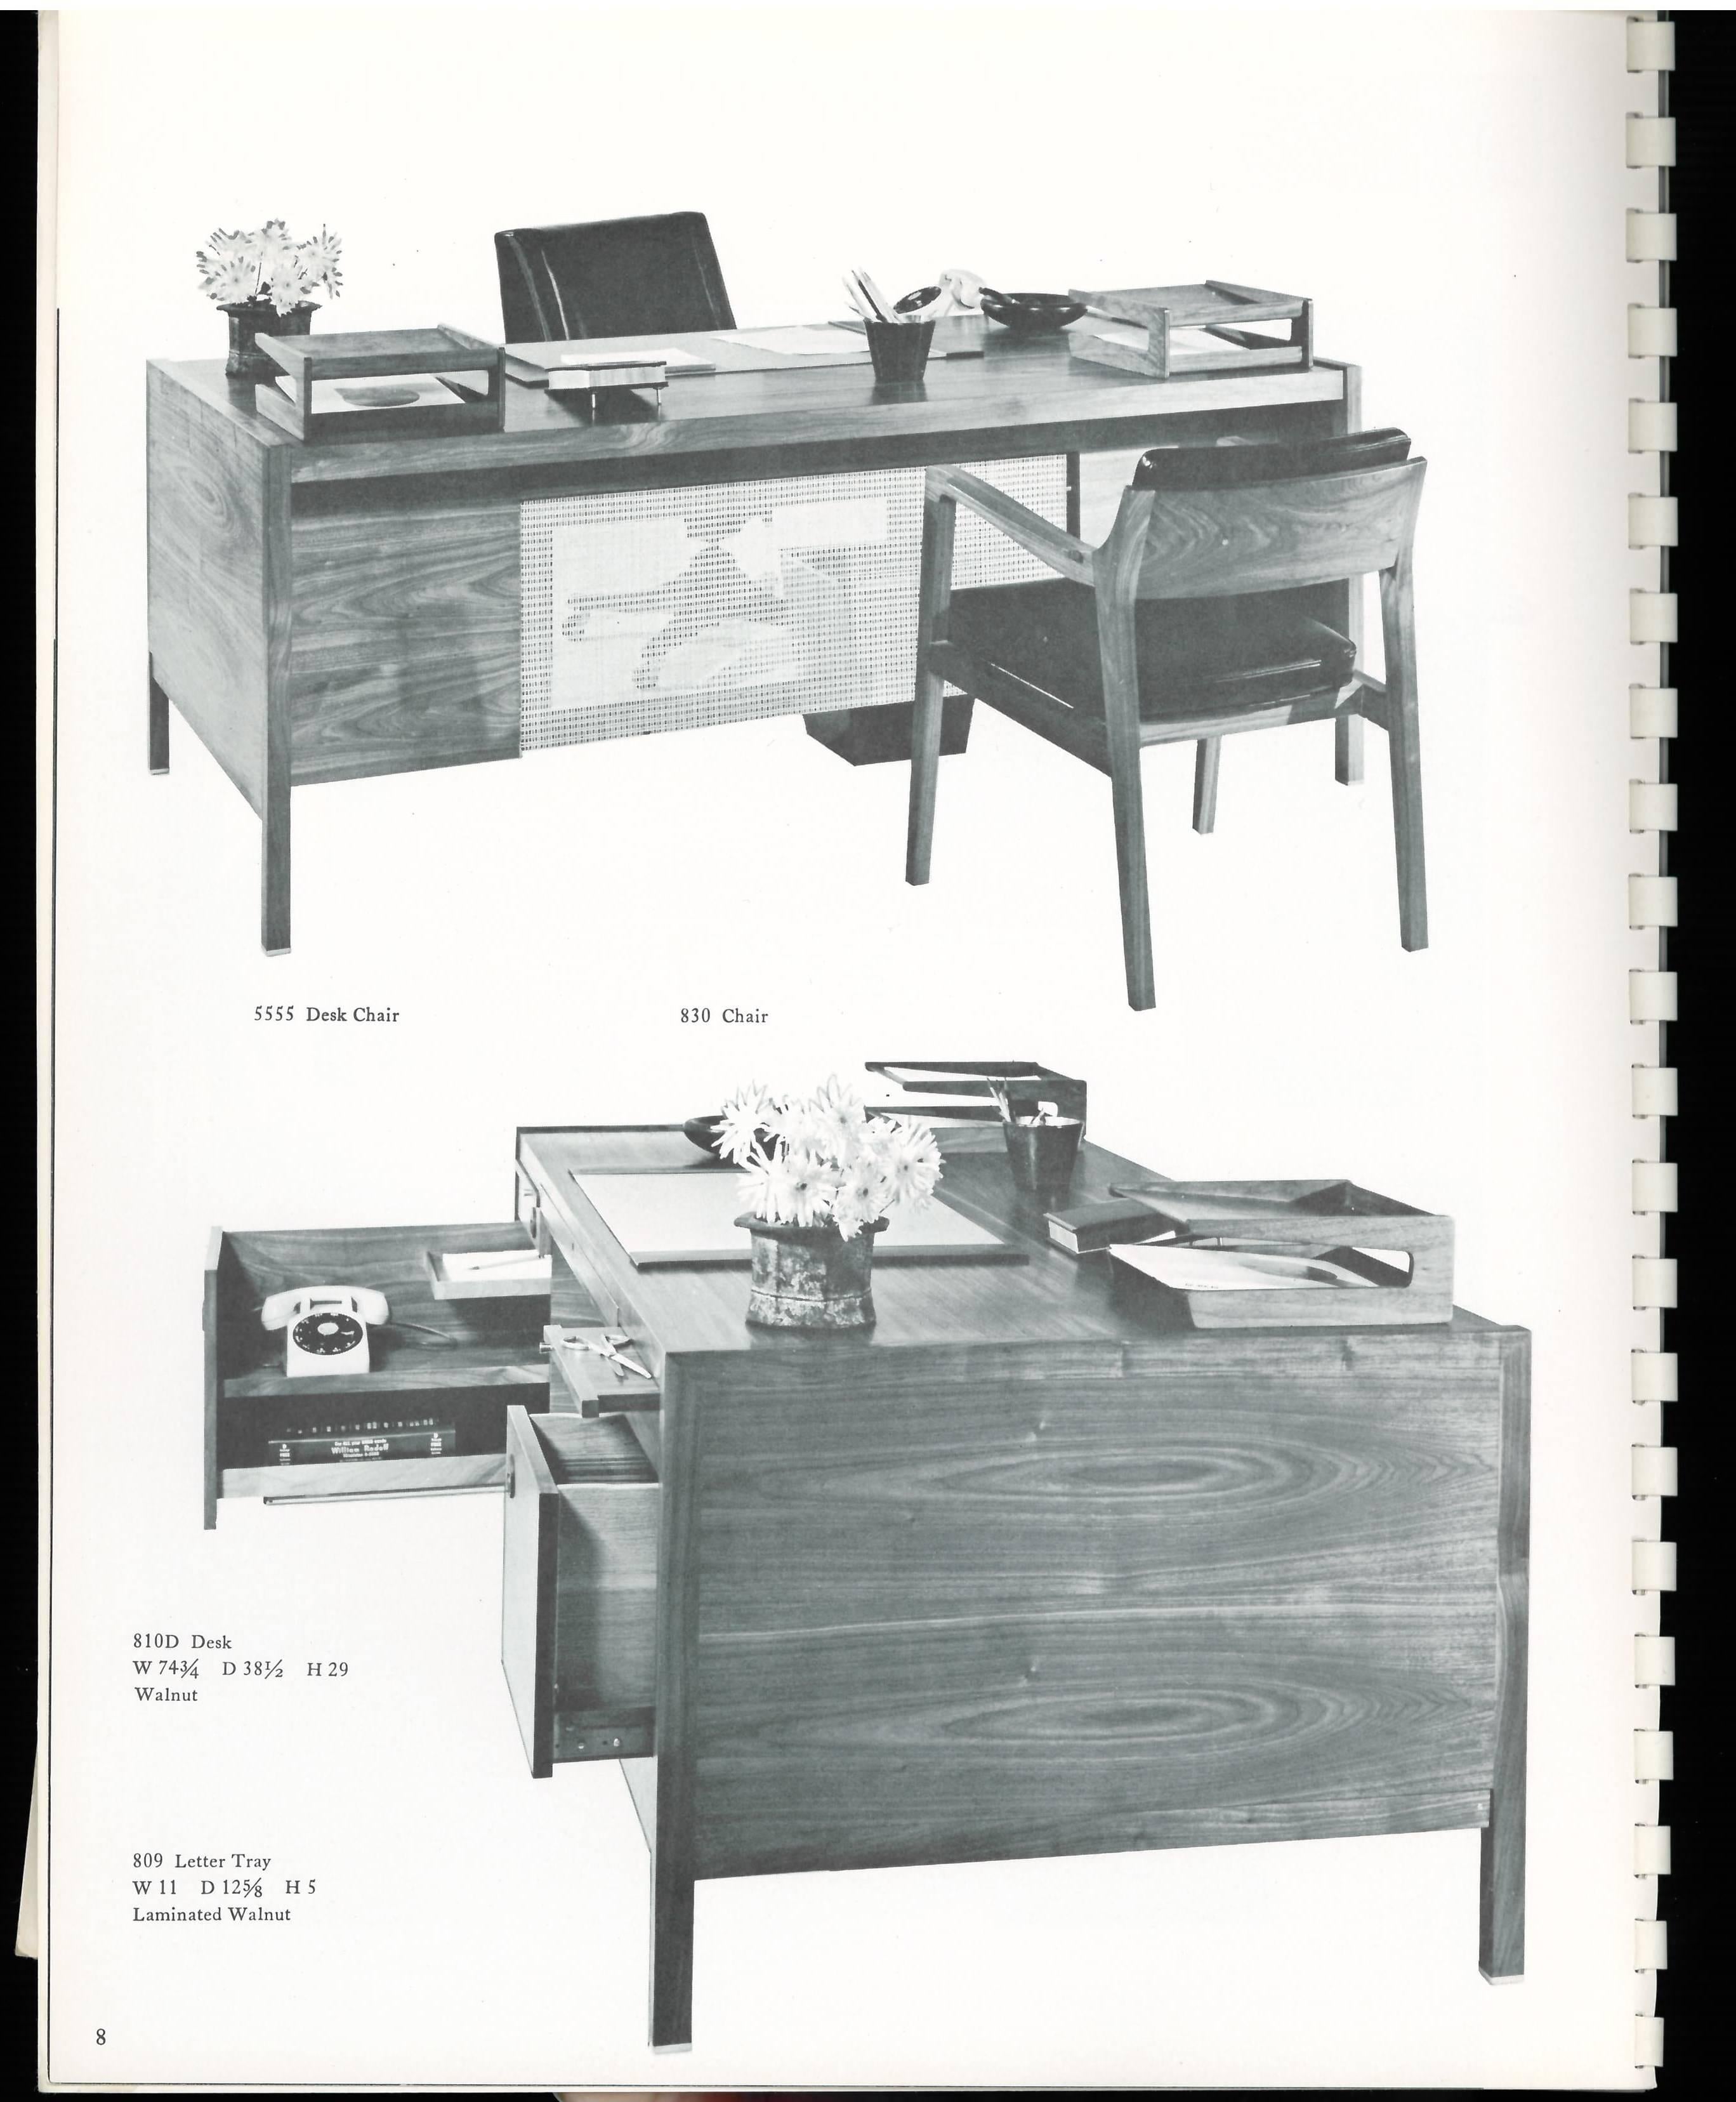 Produced in 1959 this catalogue in sort covers introduced what was then 